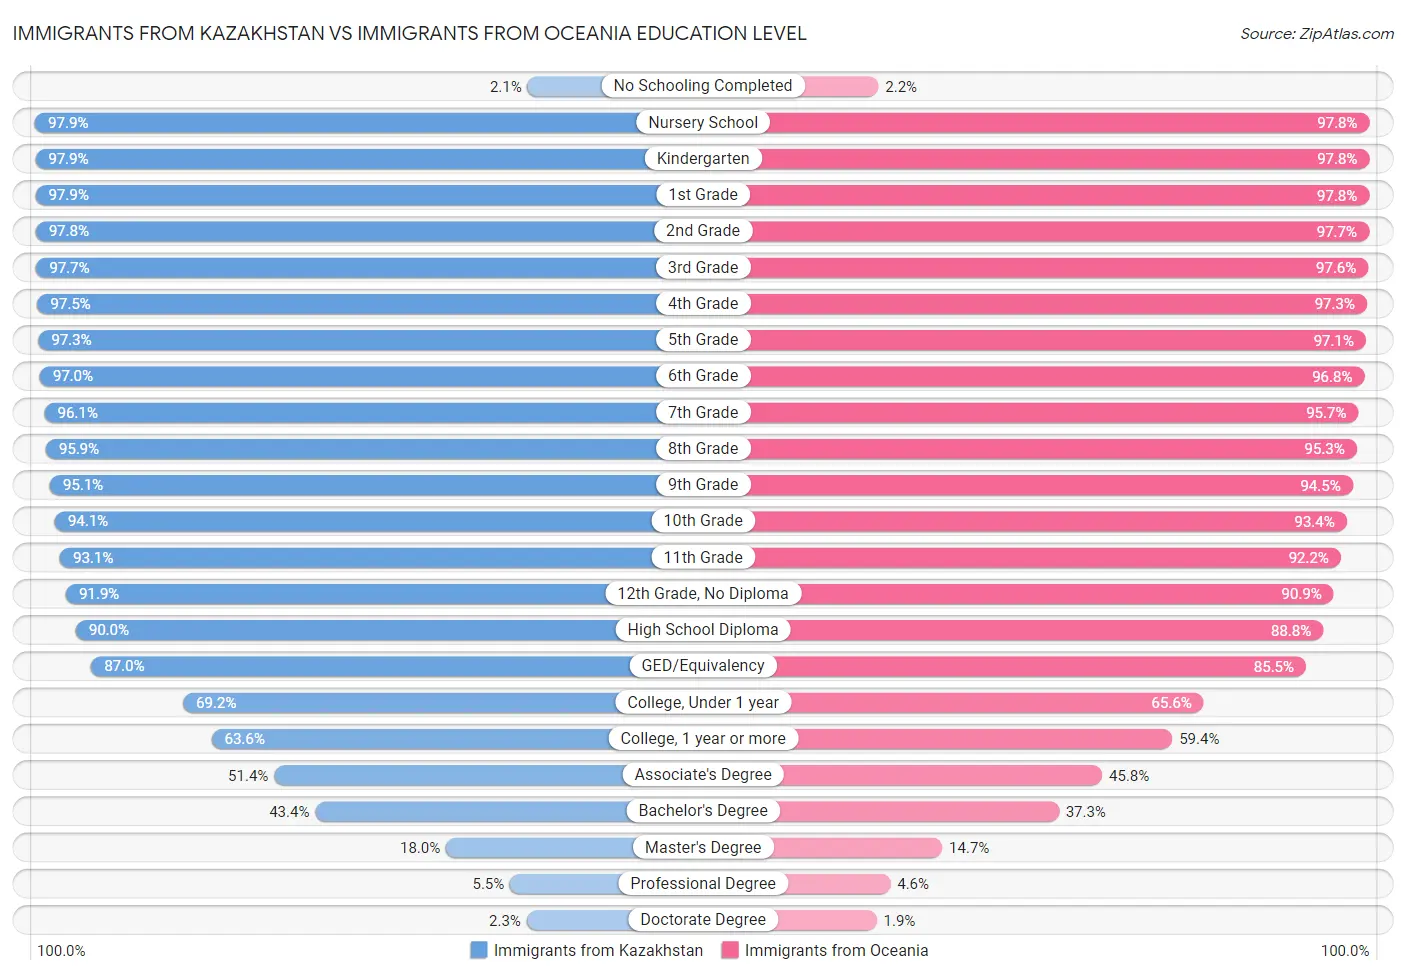 Immigrants from Kazakhstan vs Immigrants from Oceania Education Level